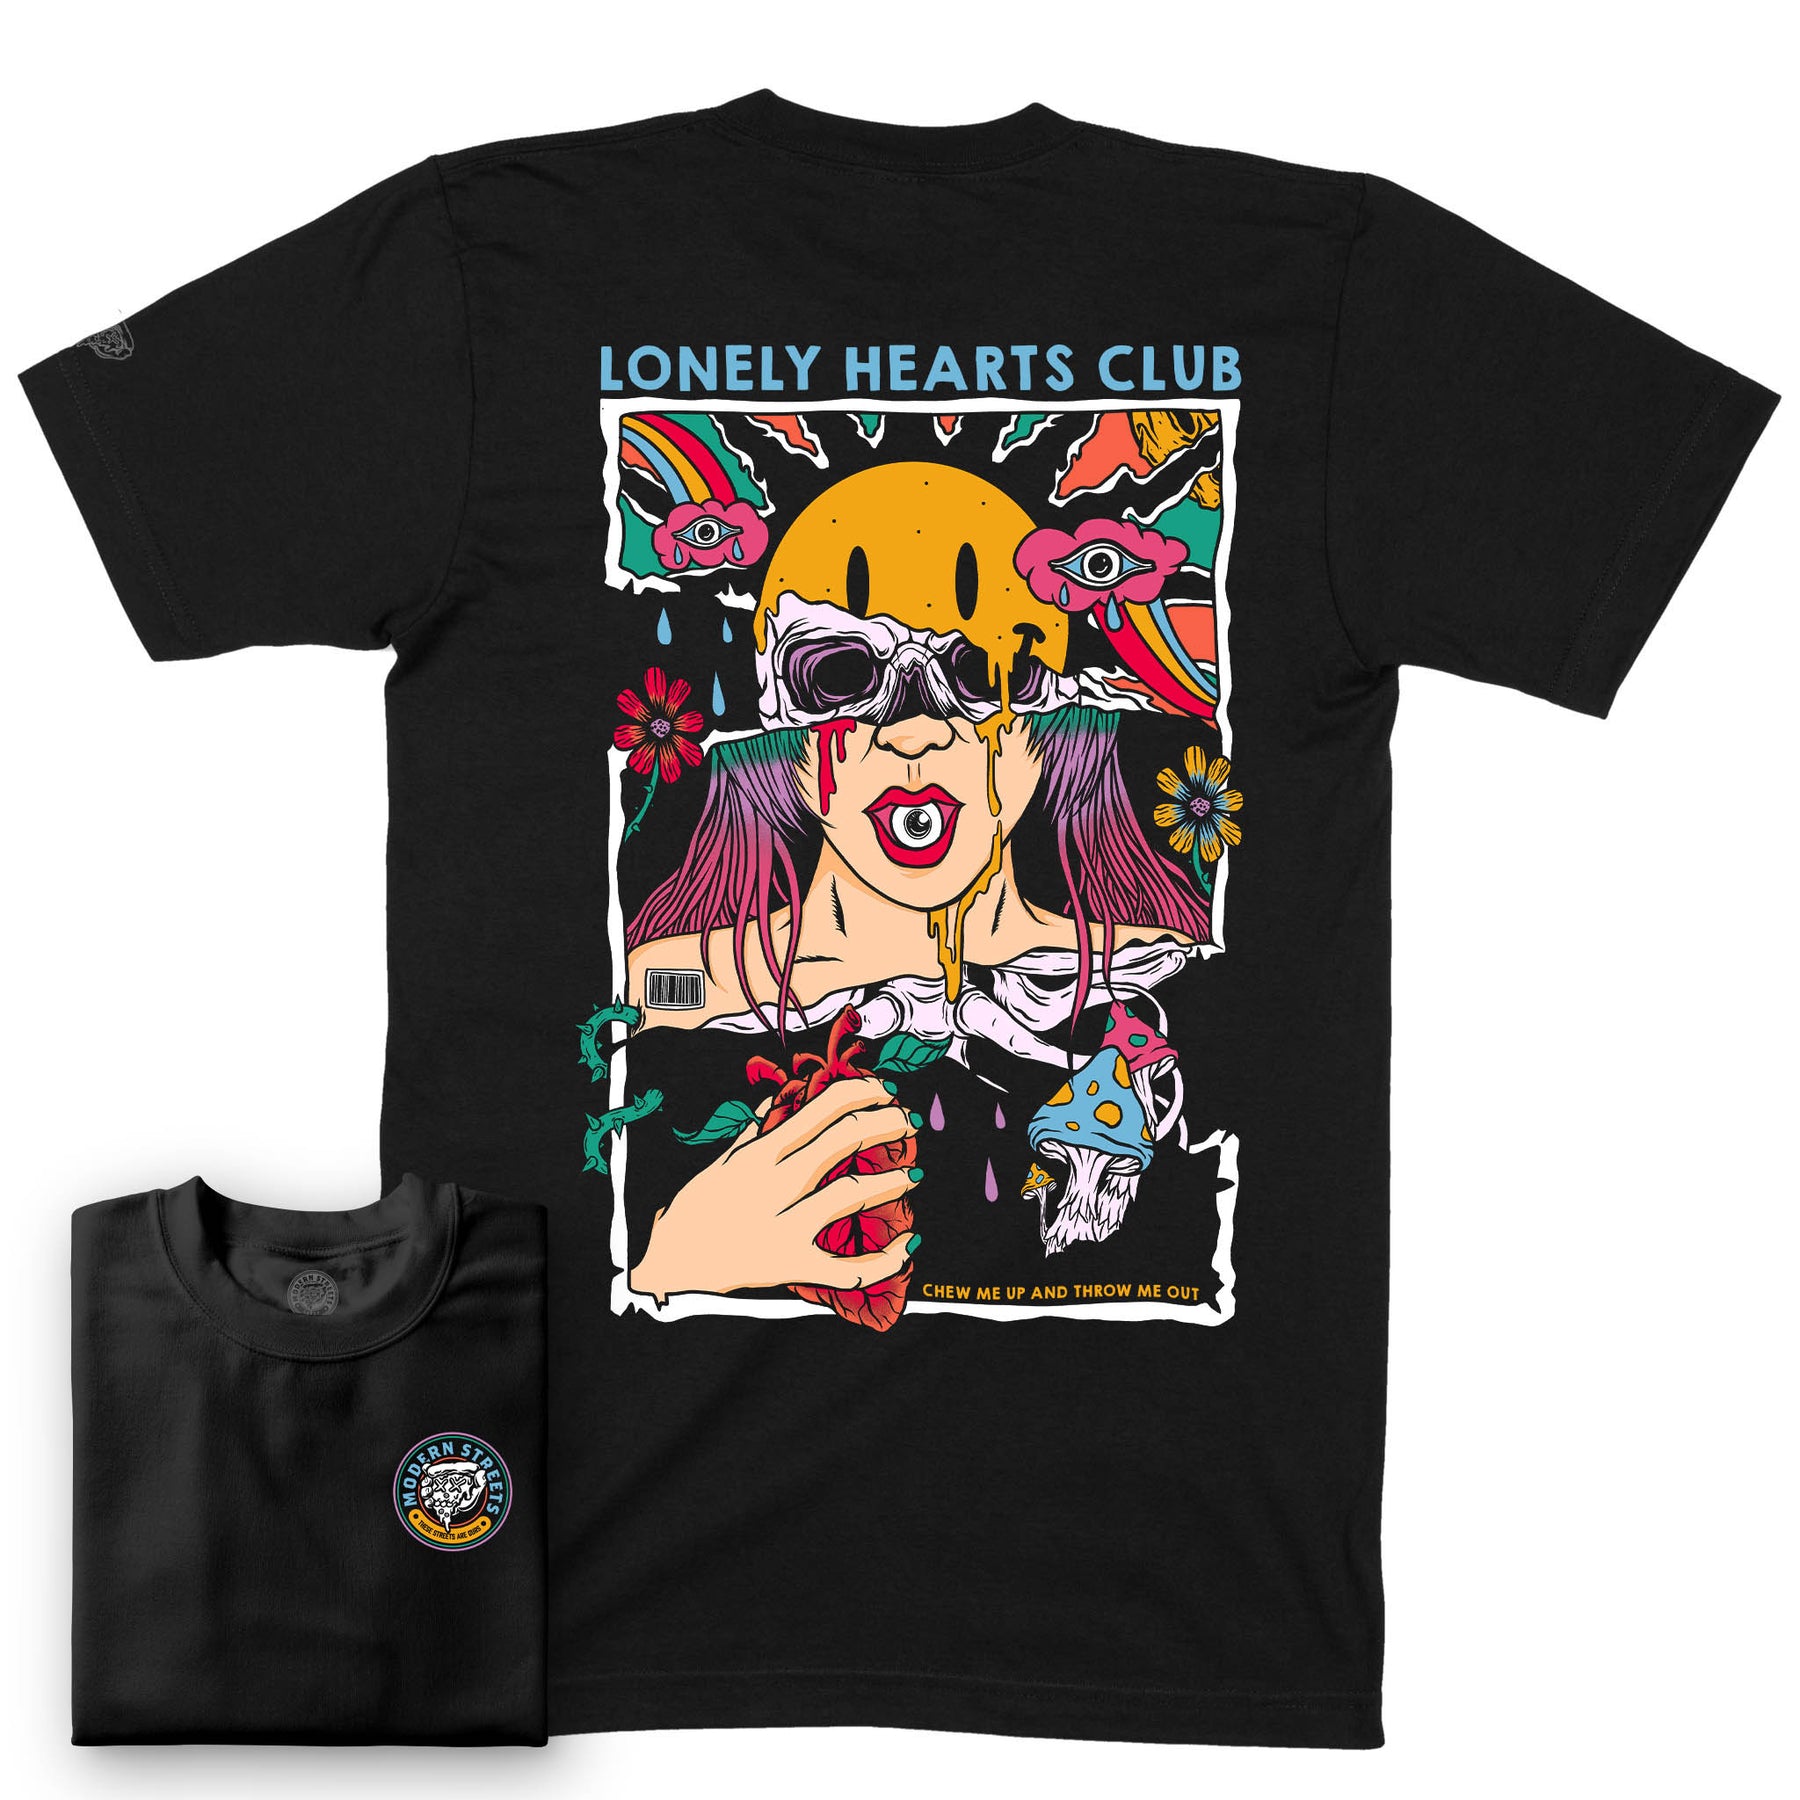 Lonely Hearts Club Short-Sleeve T-Shirt